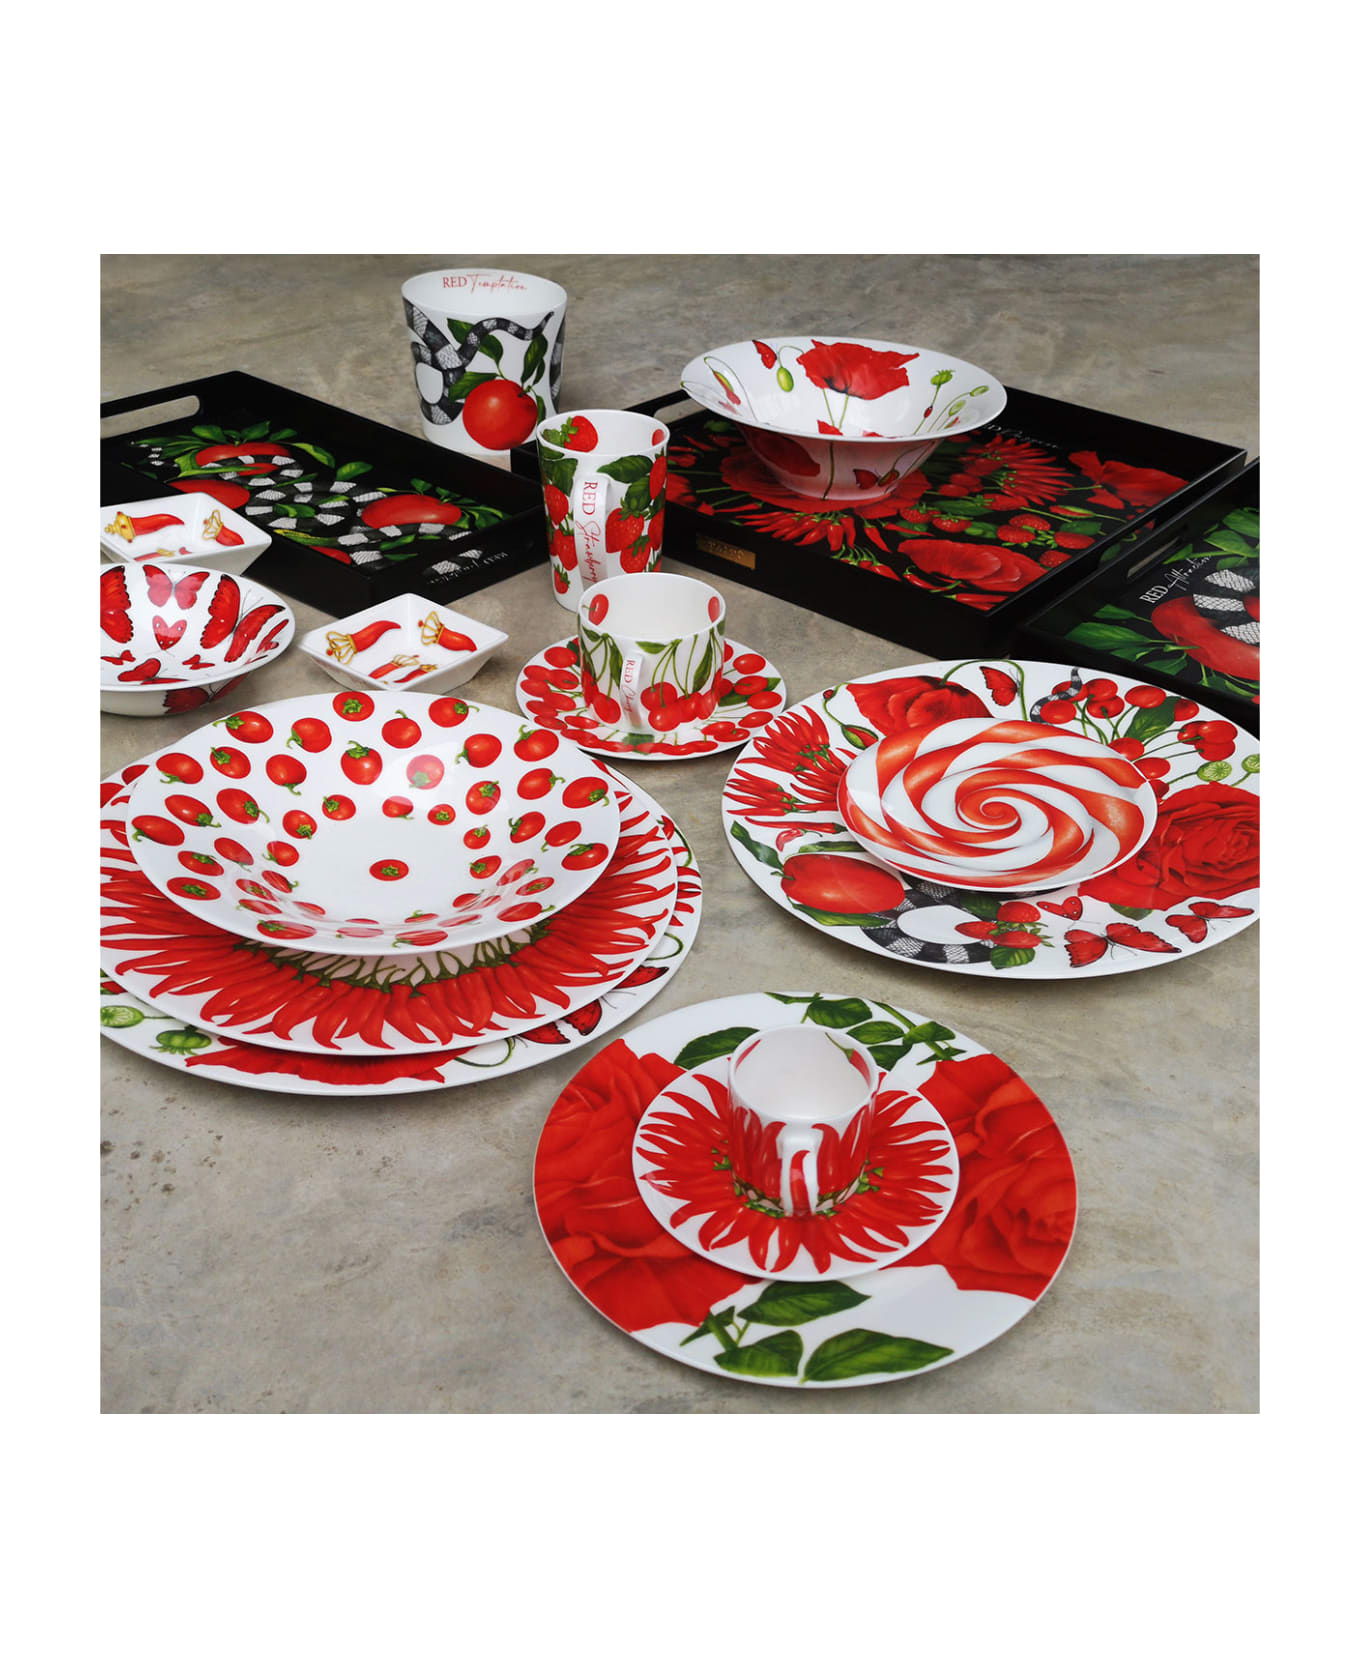 Taitù Set of 2 Espresso Cups & Saucers RED PEPPER - RED Collection - Red